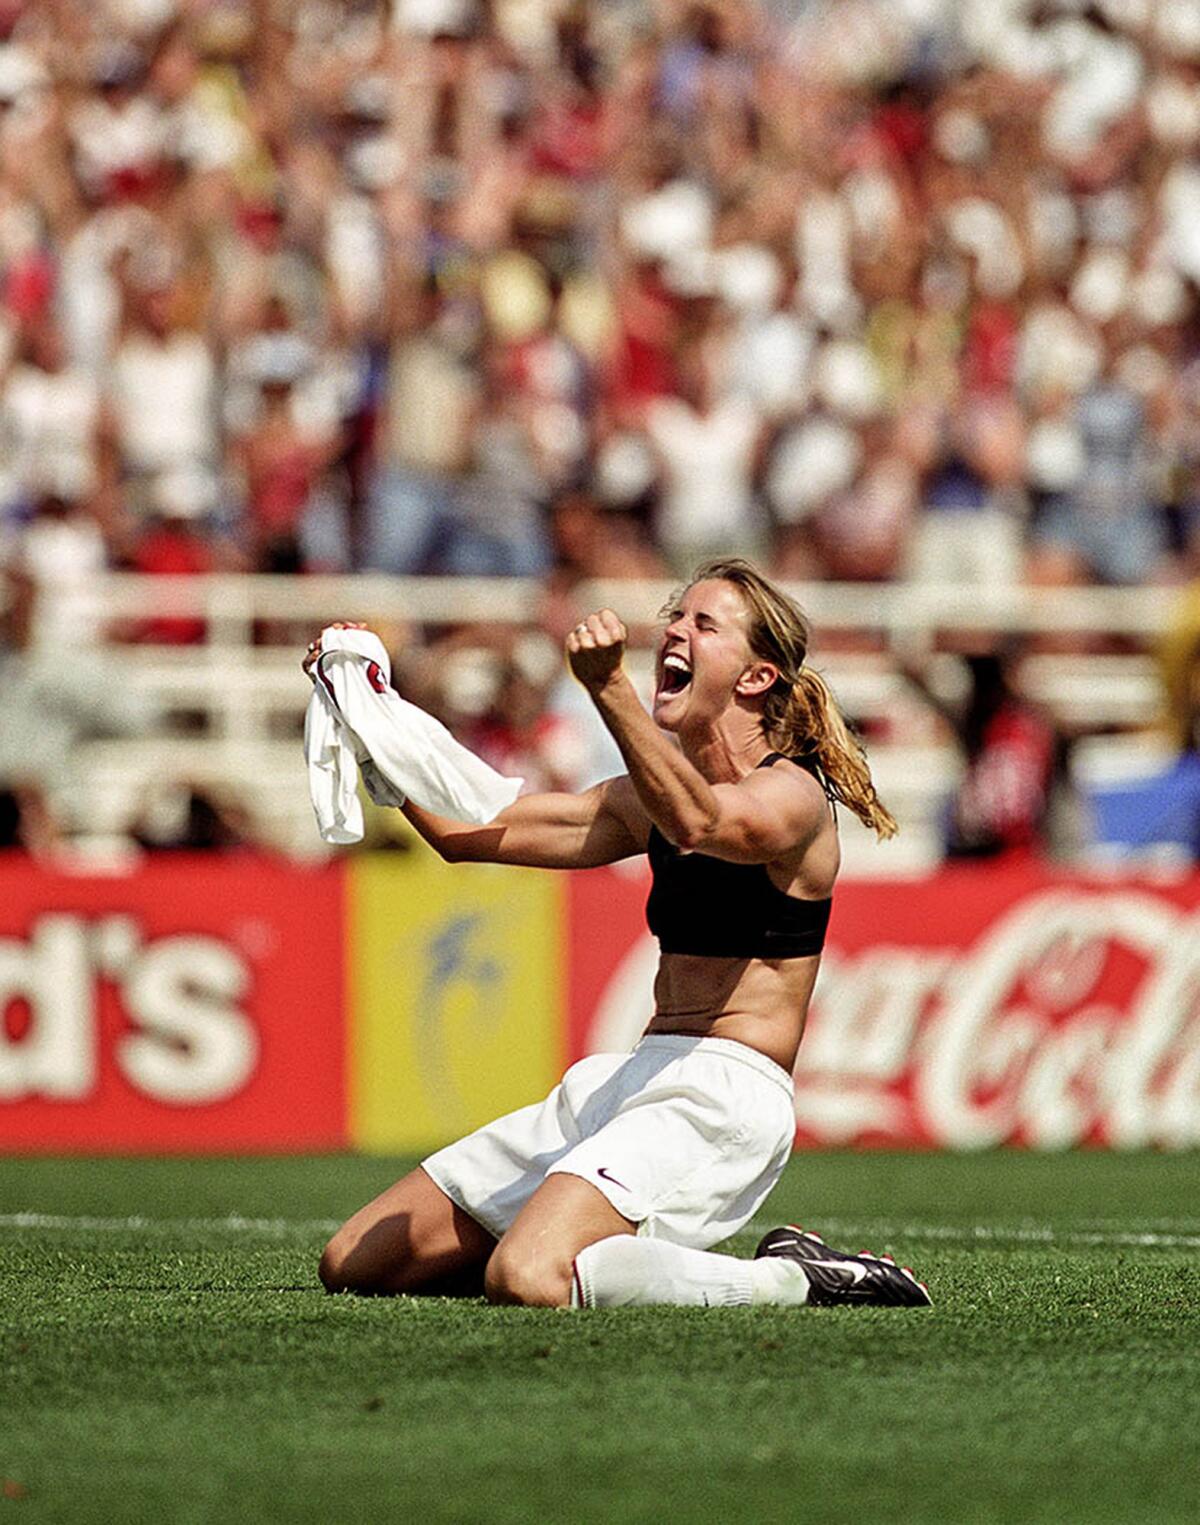 World champion Brandi Chastain exults after scoring the winning goal in the United States' 5-4 penalty-kick victory over China in the World Cup final in front of 90,185 at the Rose Bowl in 1999.